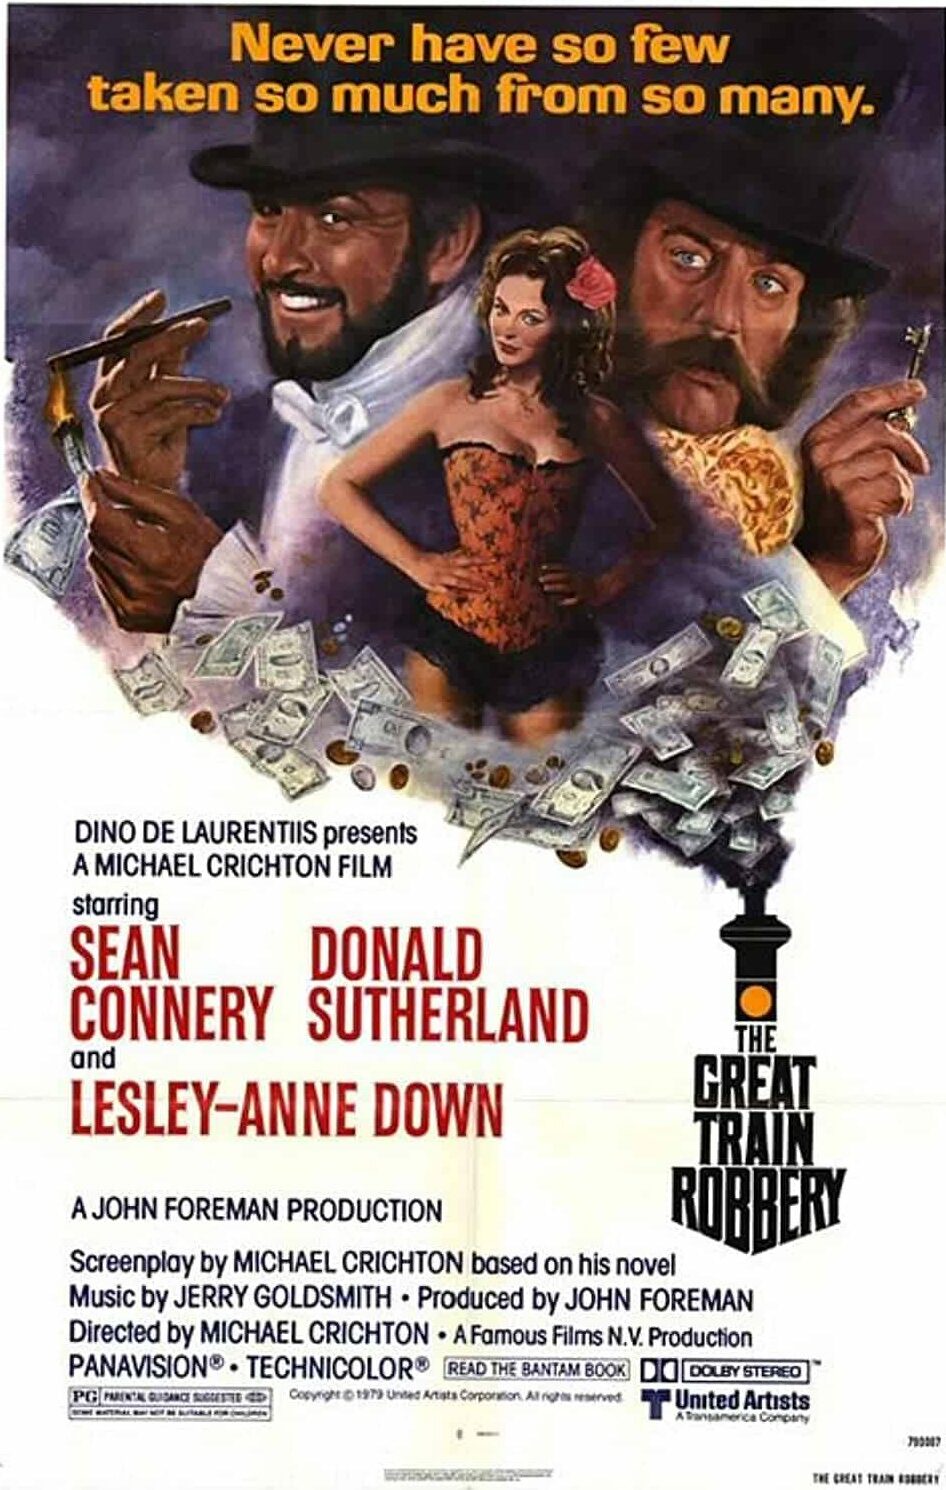 The Great Train Robbery (1978) Best Train Movies You Can't miss